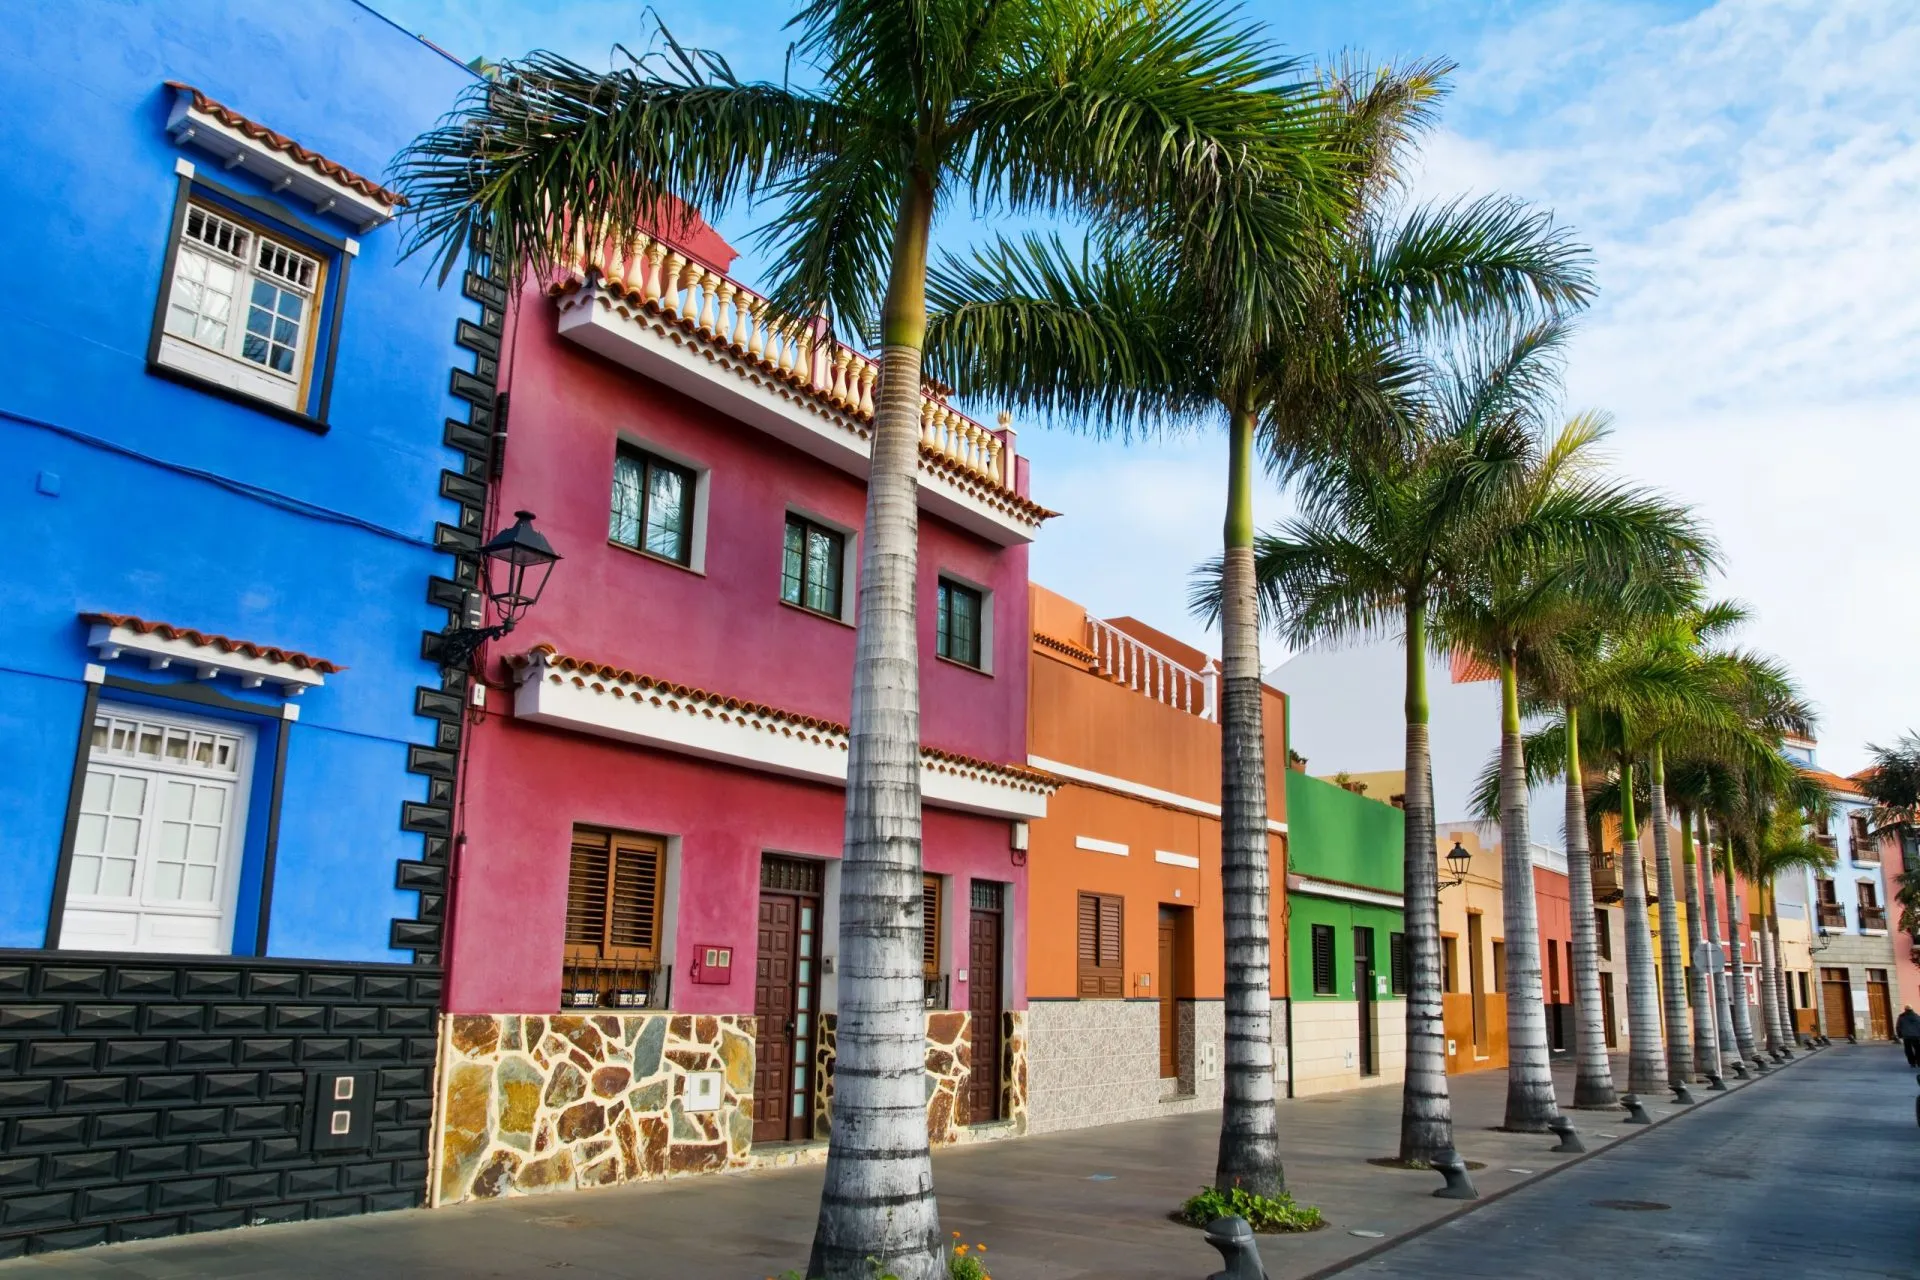 Colourful houses and palm trees on street in Puerto de la Cruz, Tenerife, Canary Islands.